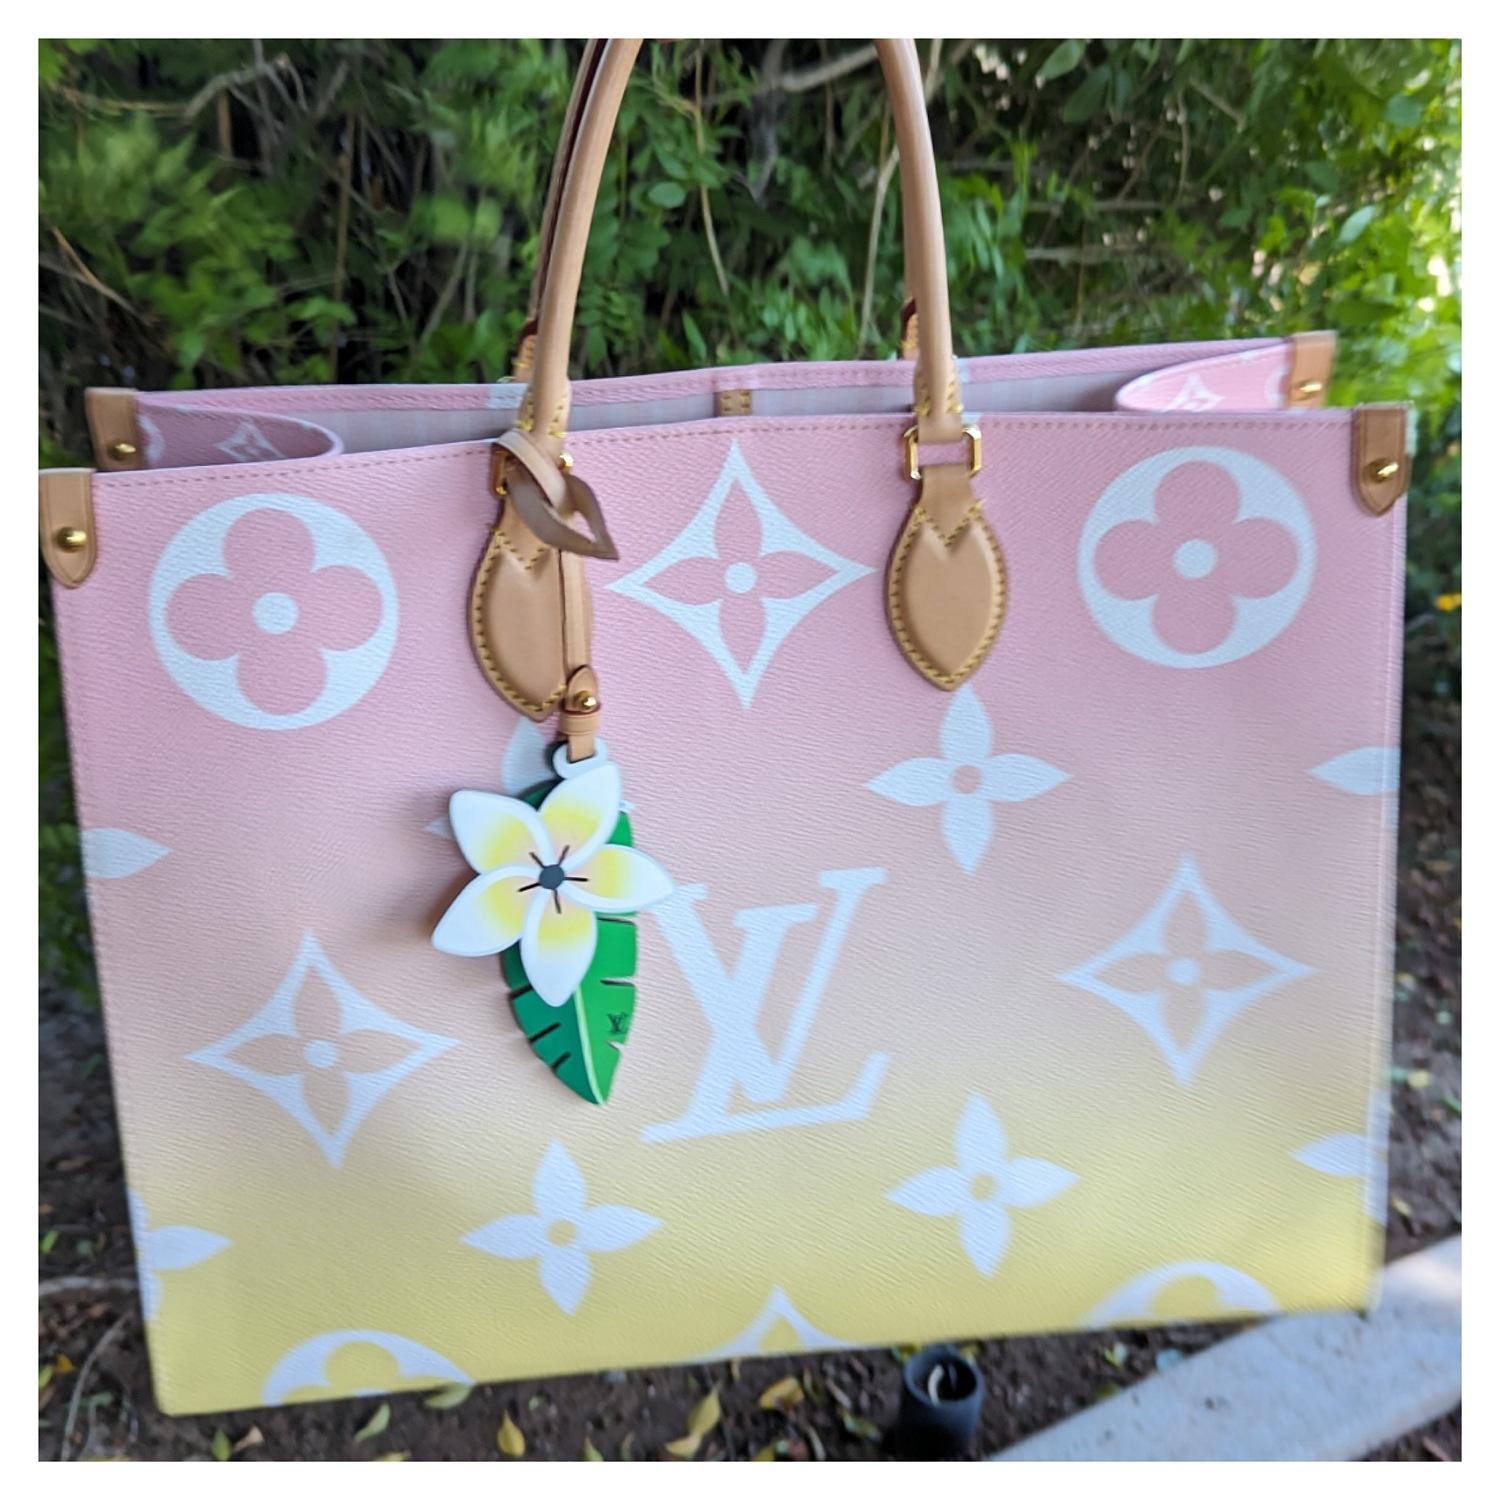 Louis Vuitton Light Pink Giant Monogram and Raffia by The Pool Hawaii Edition Onthego GM Gold Hardware, 2021 (Like New), Yellow/Pink Womens Handbag